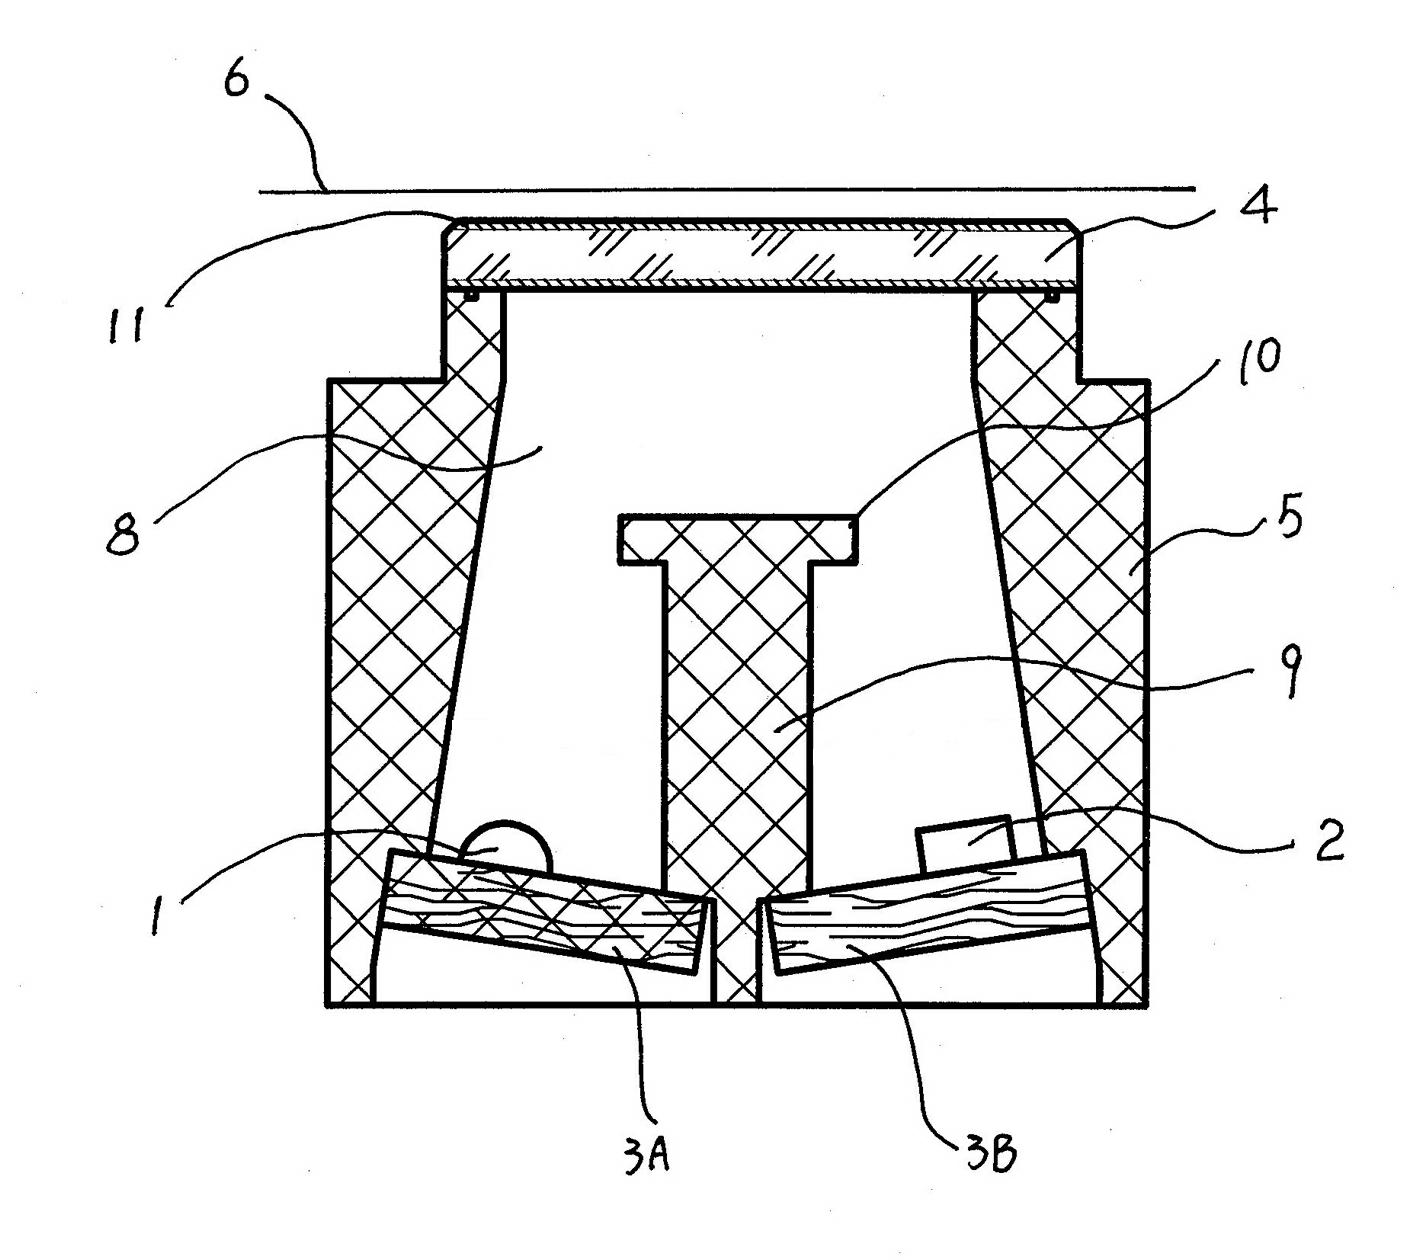 Optical device for detecting and identifying damaged paper money by using photosensitive element